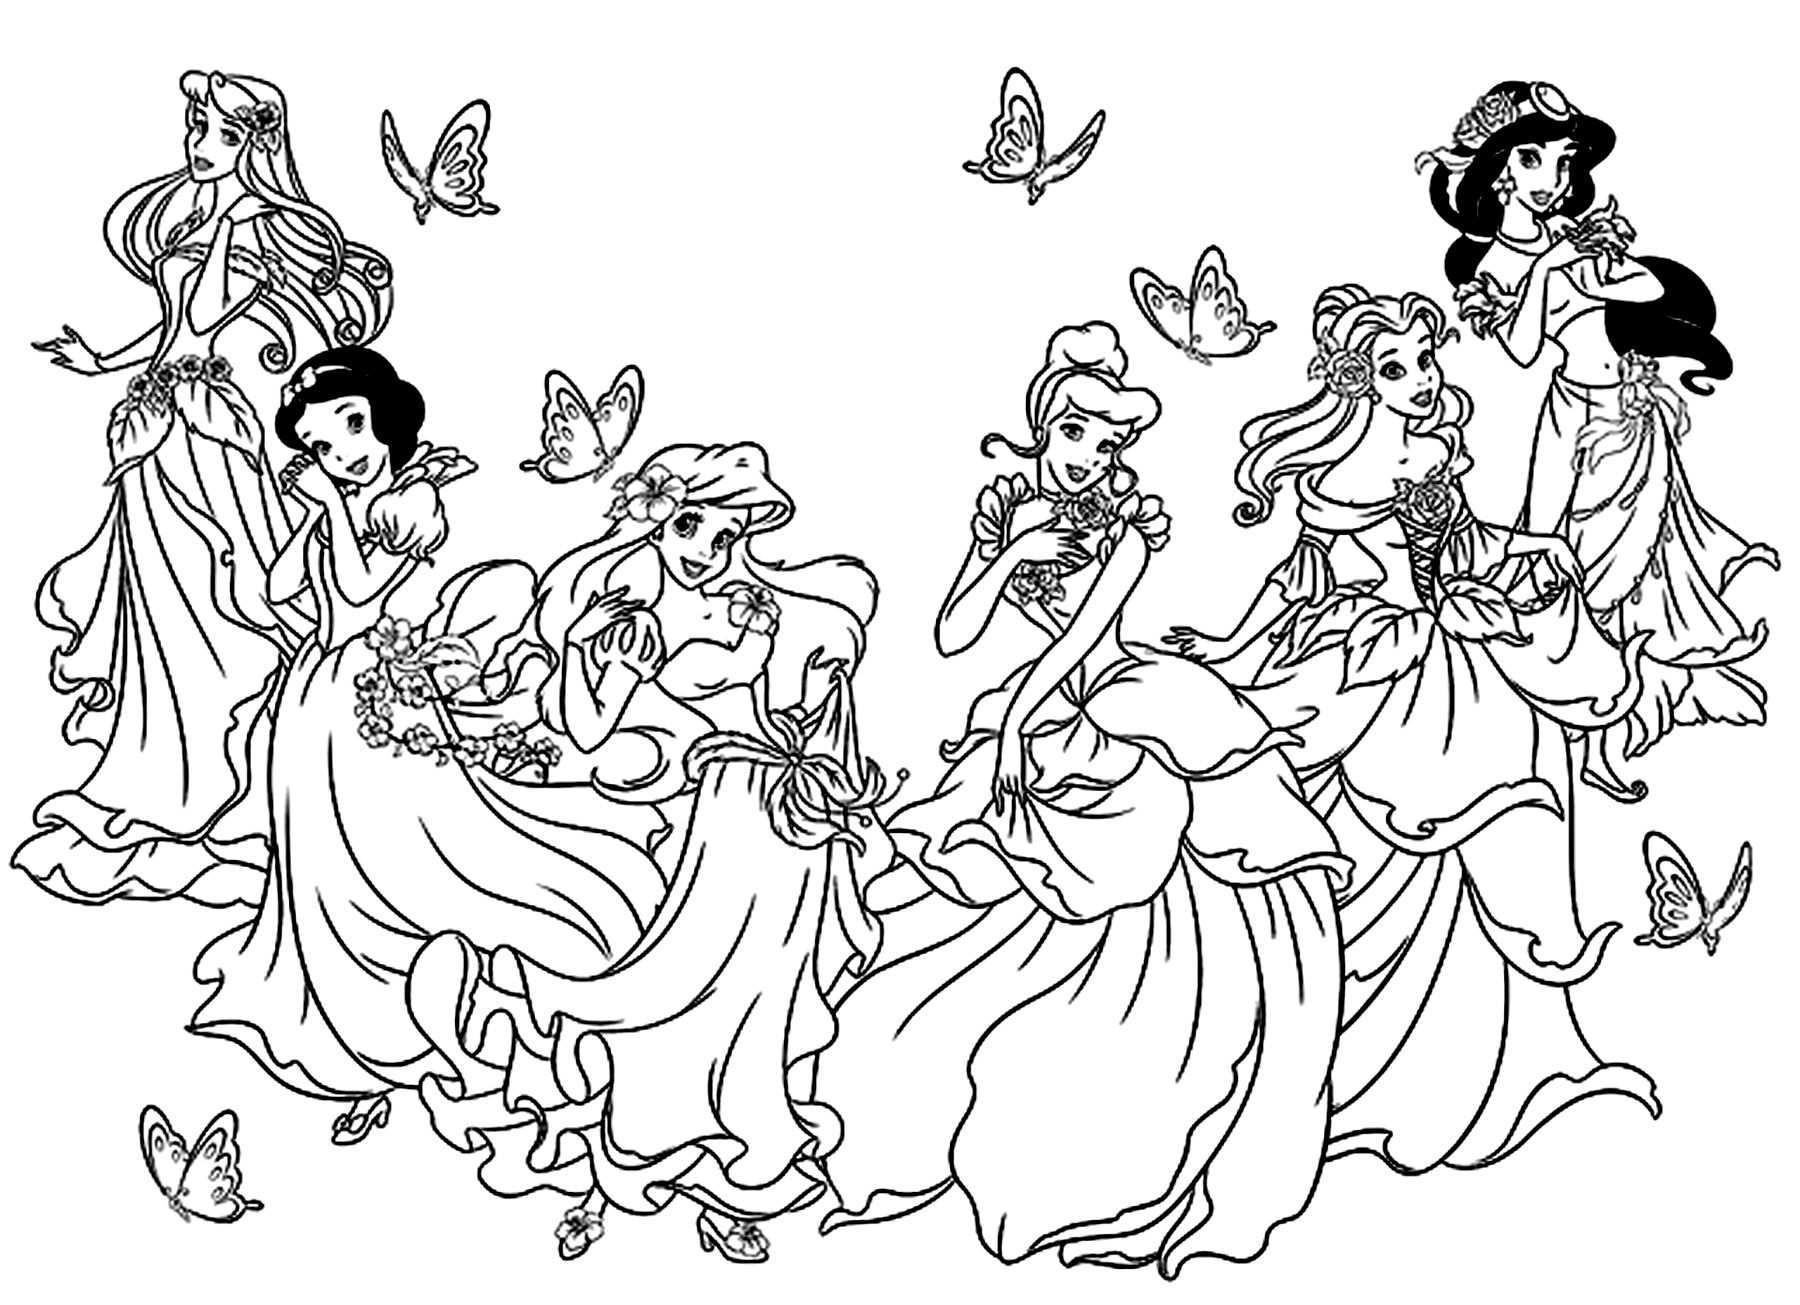 All Princesses Disney Return To Childhood Coloring Pages For